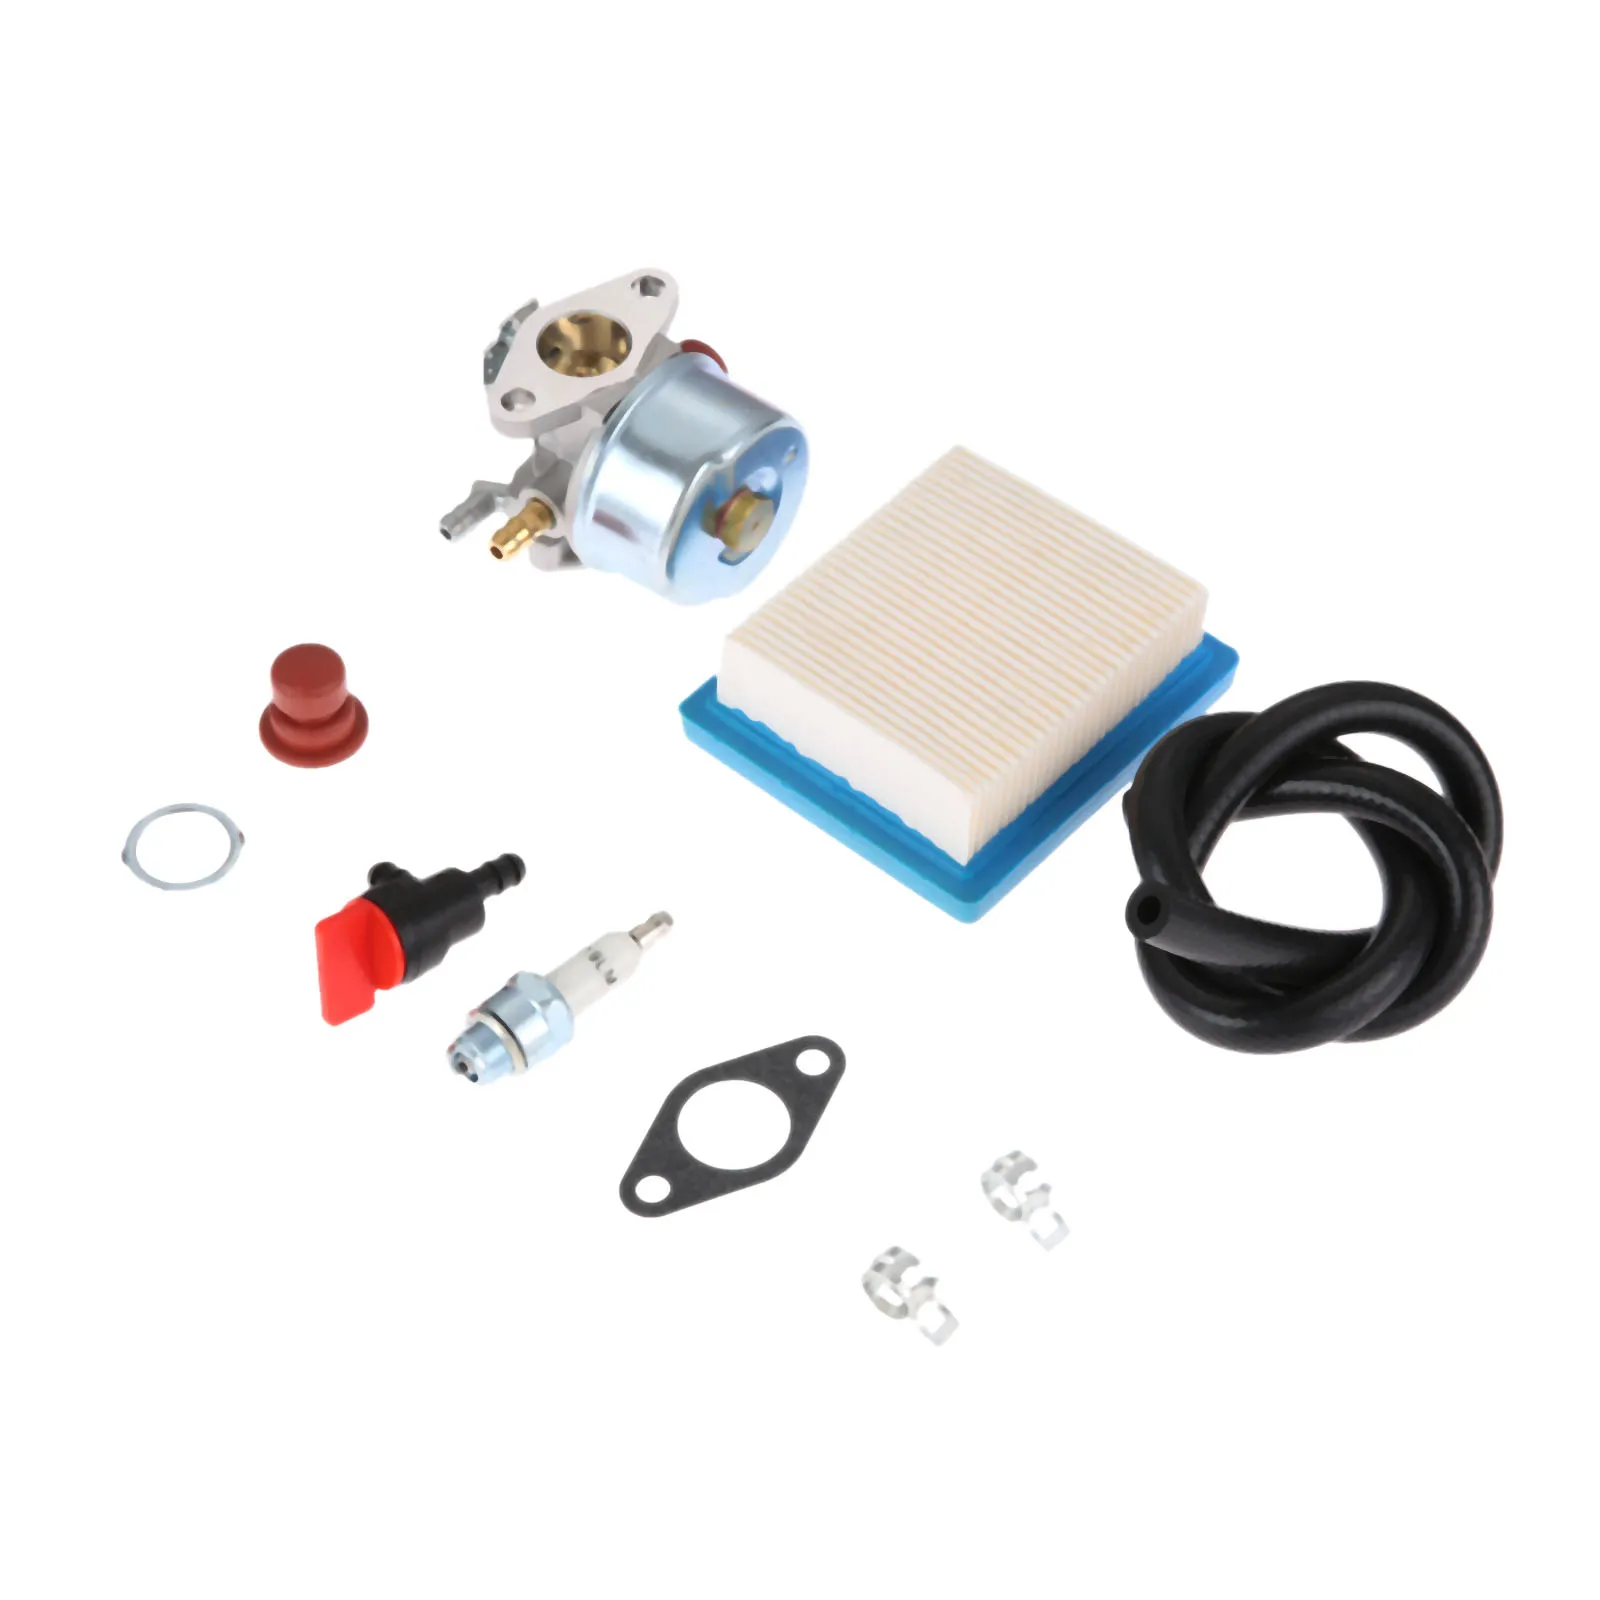 

Carburetor Kit For Tecumseh OHH45 OHH50 OHH55 OHH60 OHH65 Engine Replaces #640004 640014 640025 640017B 640117 640117B Tool Part